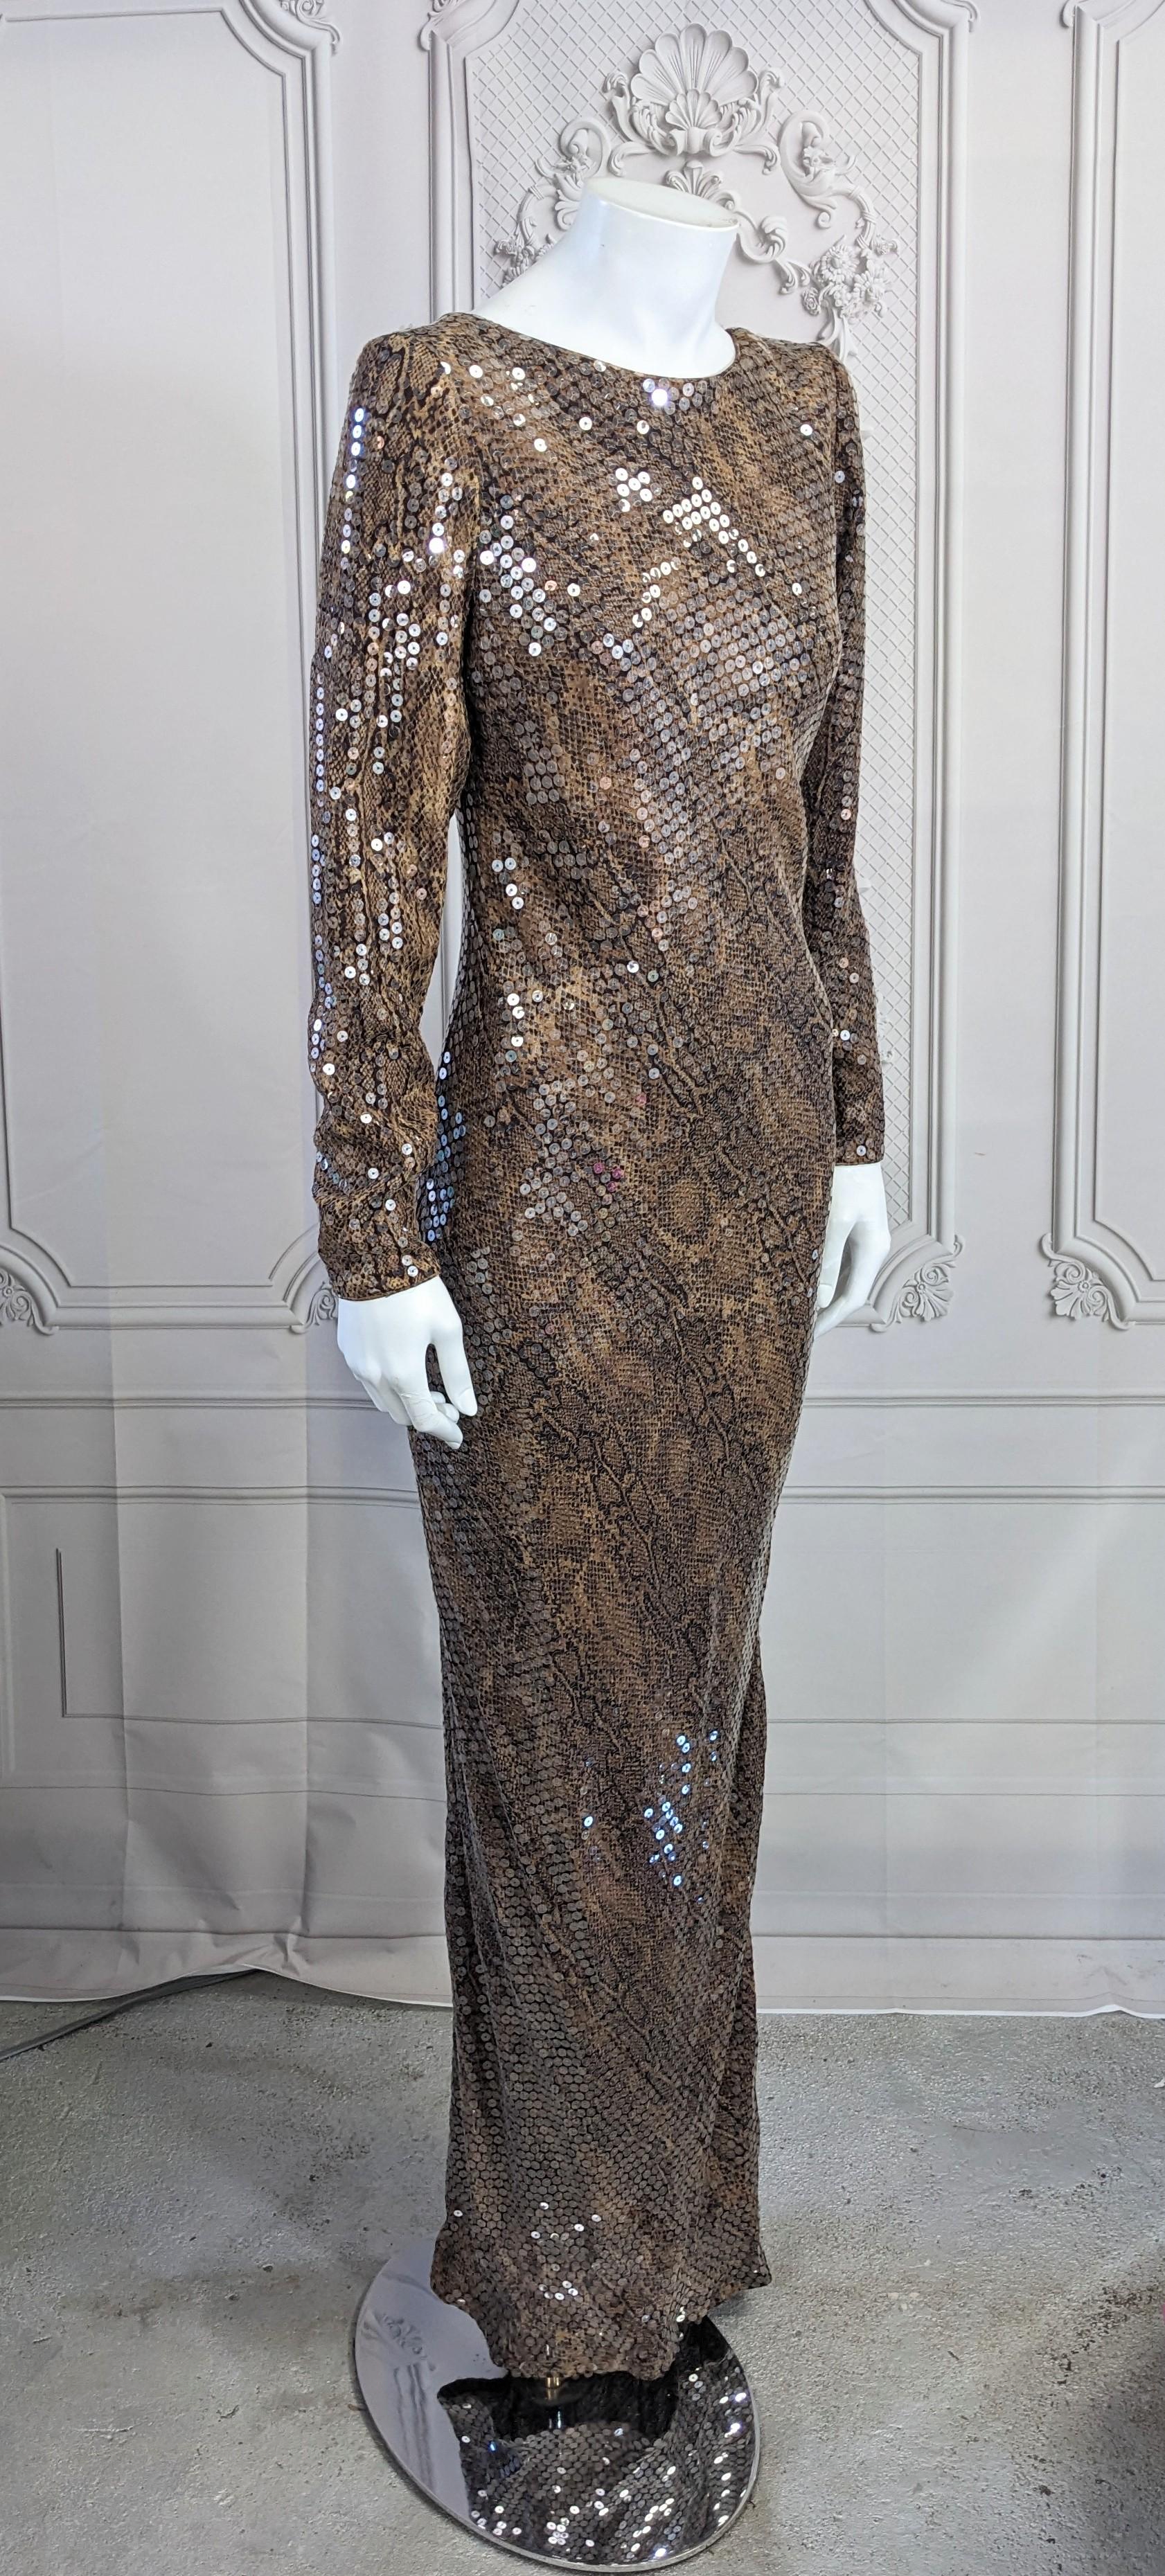 Glamorous Sequin Snake Print Column Gown In Good Condition For Sale In New York, NY